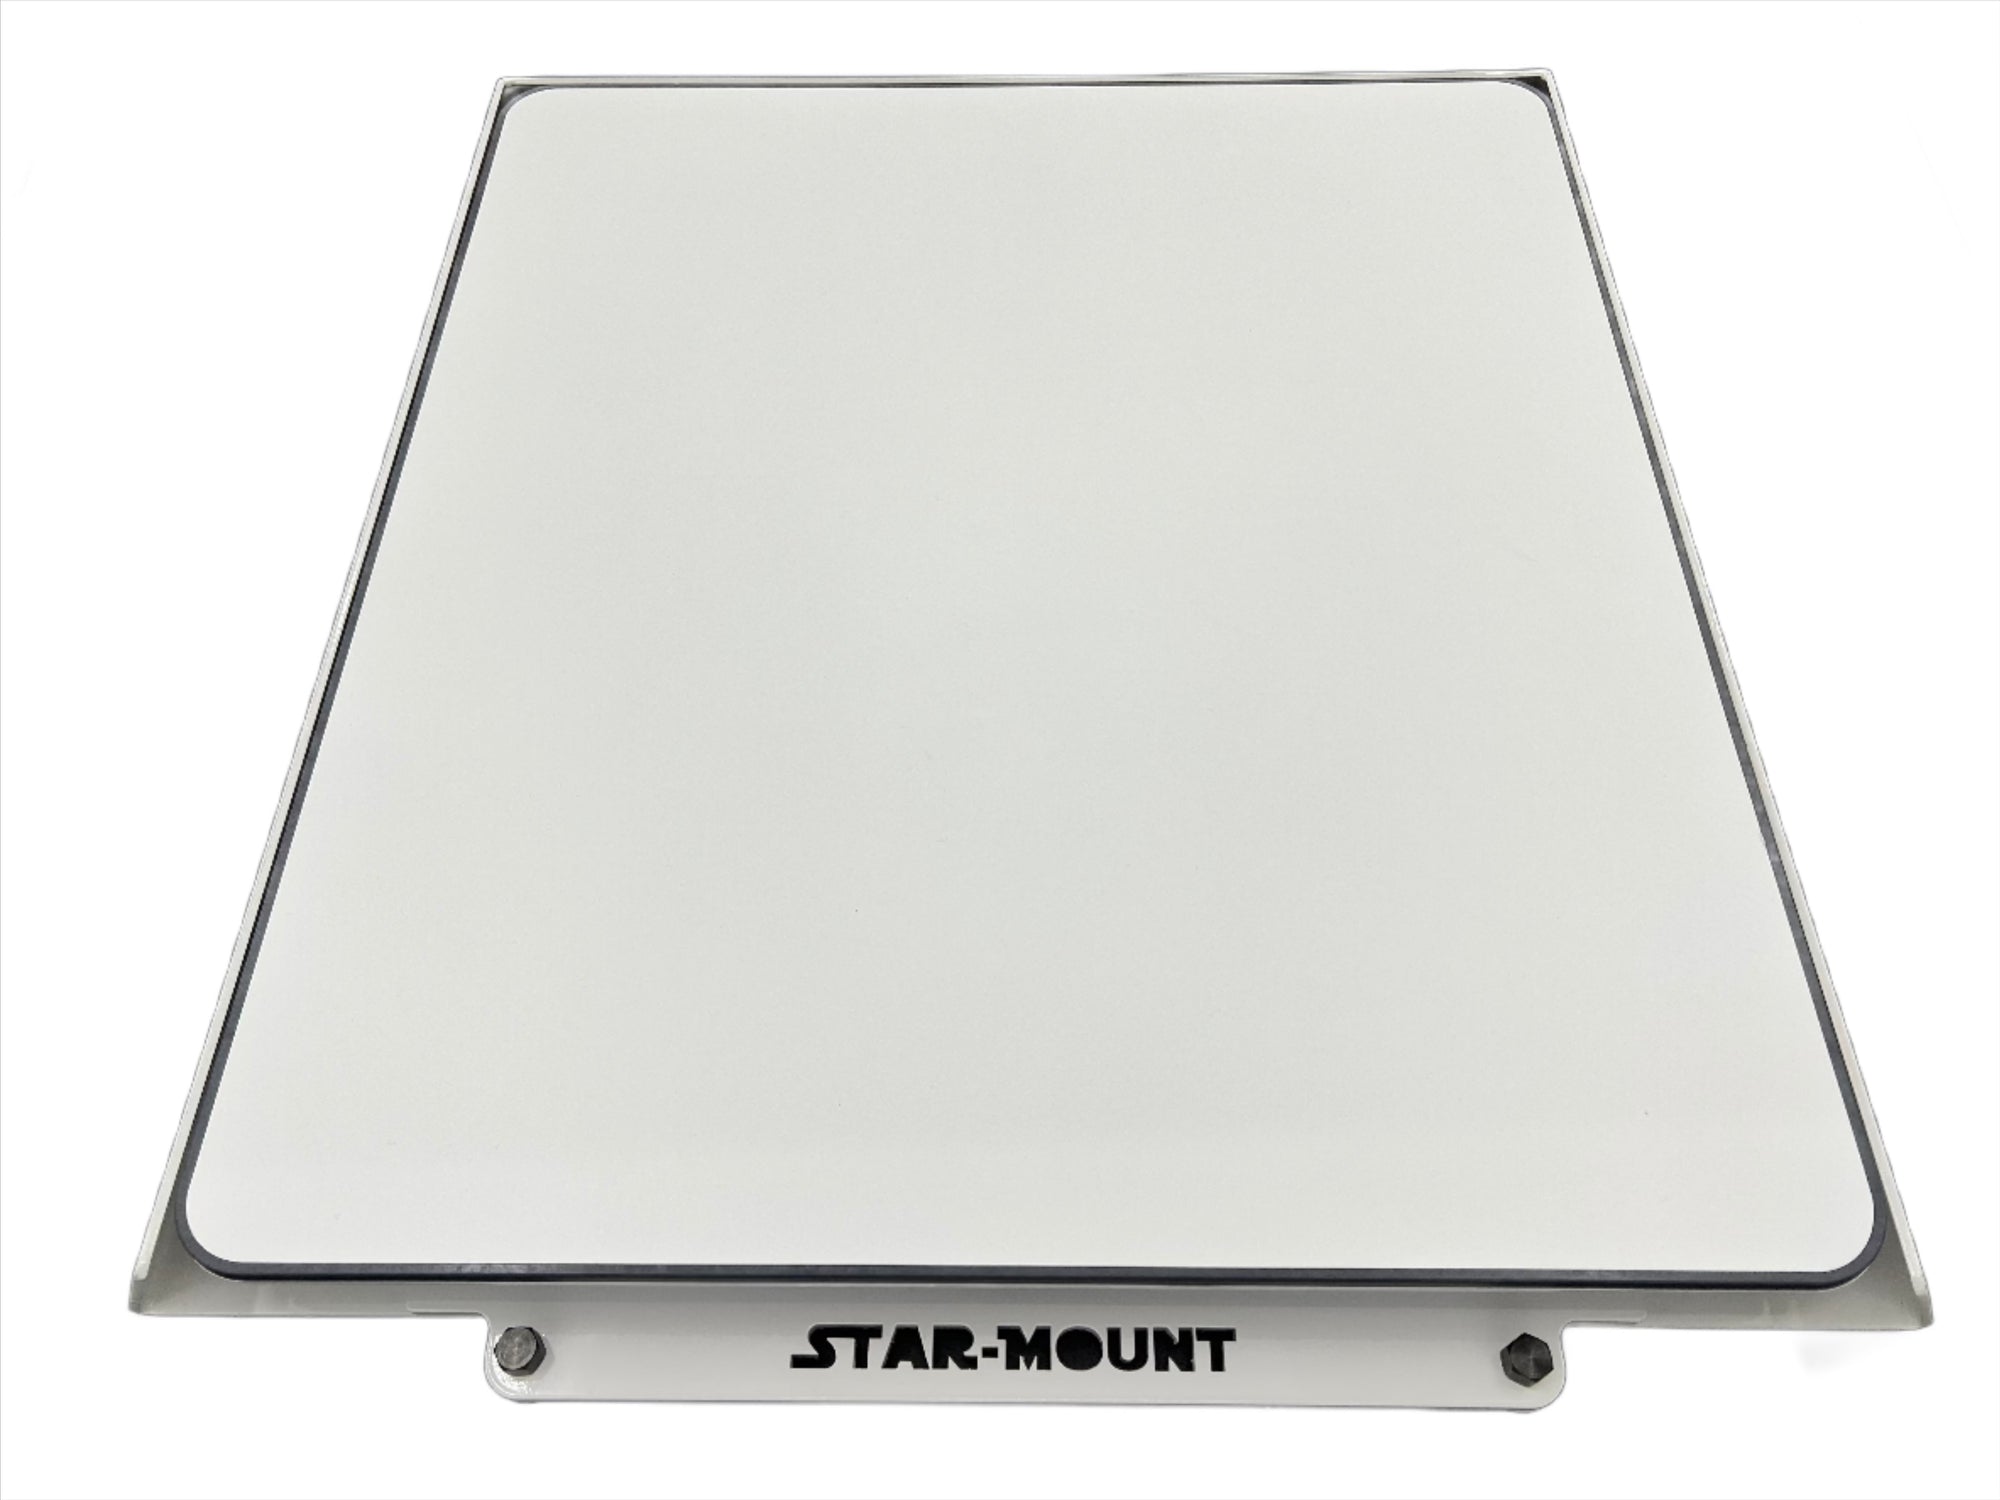 Quick-Release Mount for Starlink High Performance In-Motion Dish